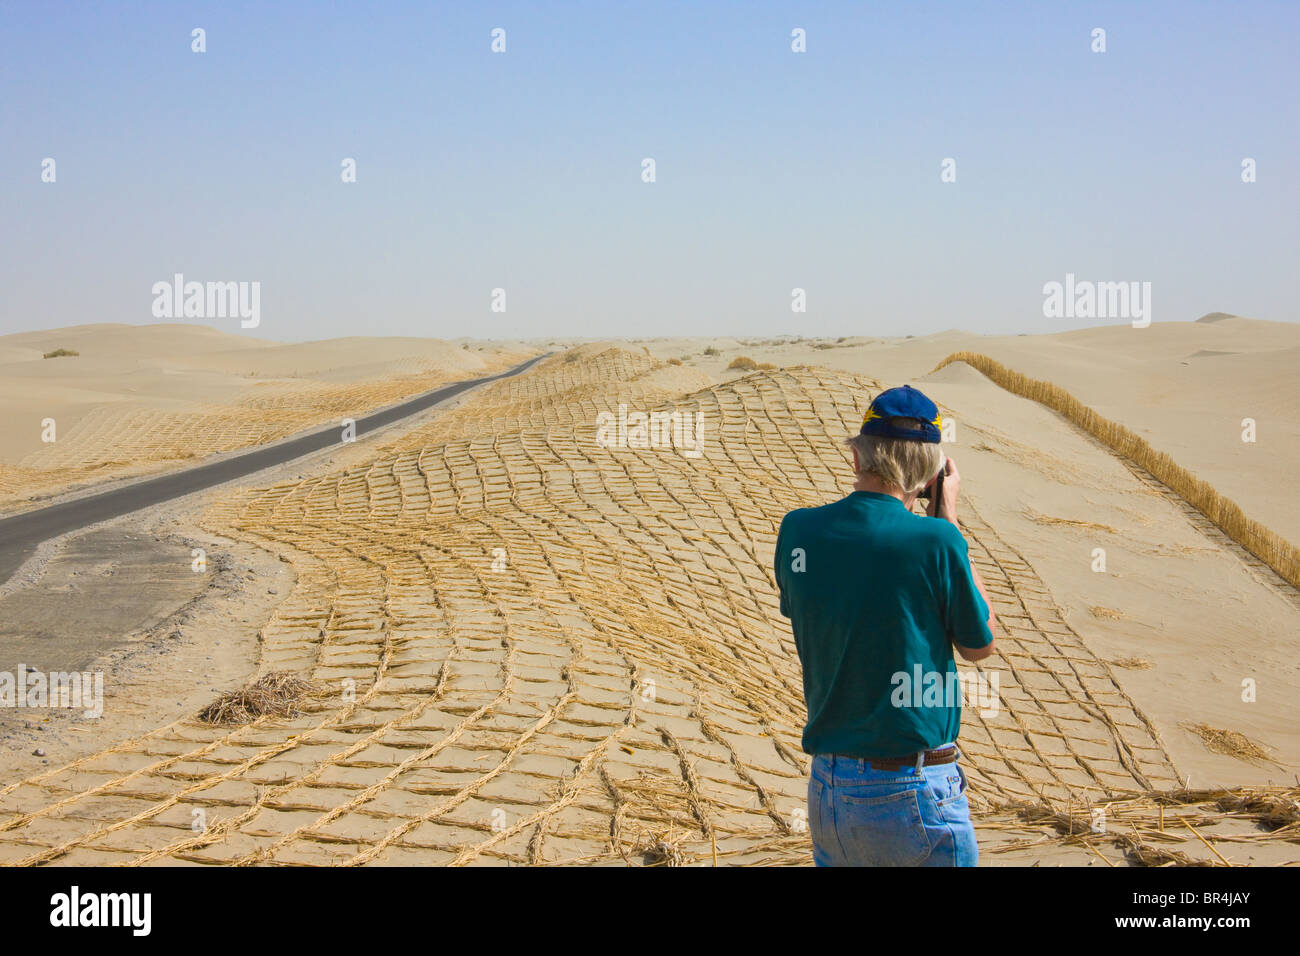 Western tourist photpgrahing reed made fence holding sand to prevent desertification, Aksu, Xinjiang, China Stock Photo